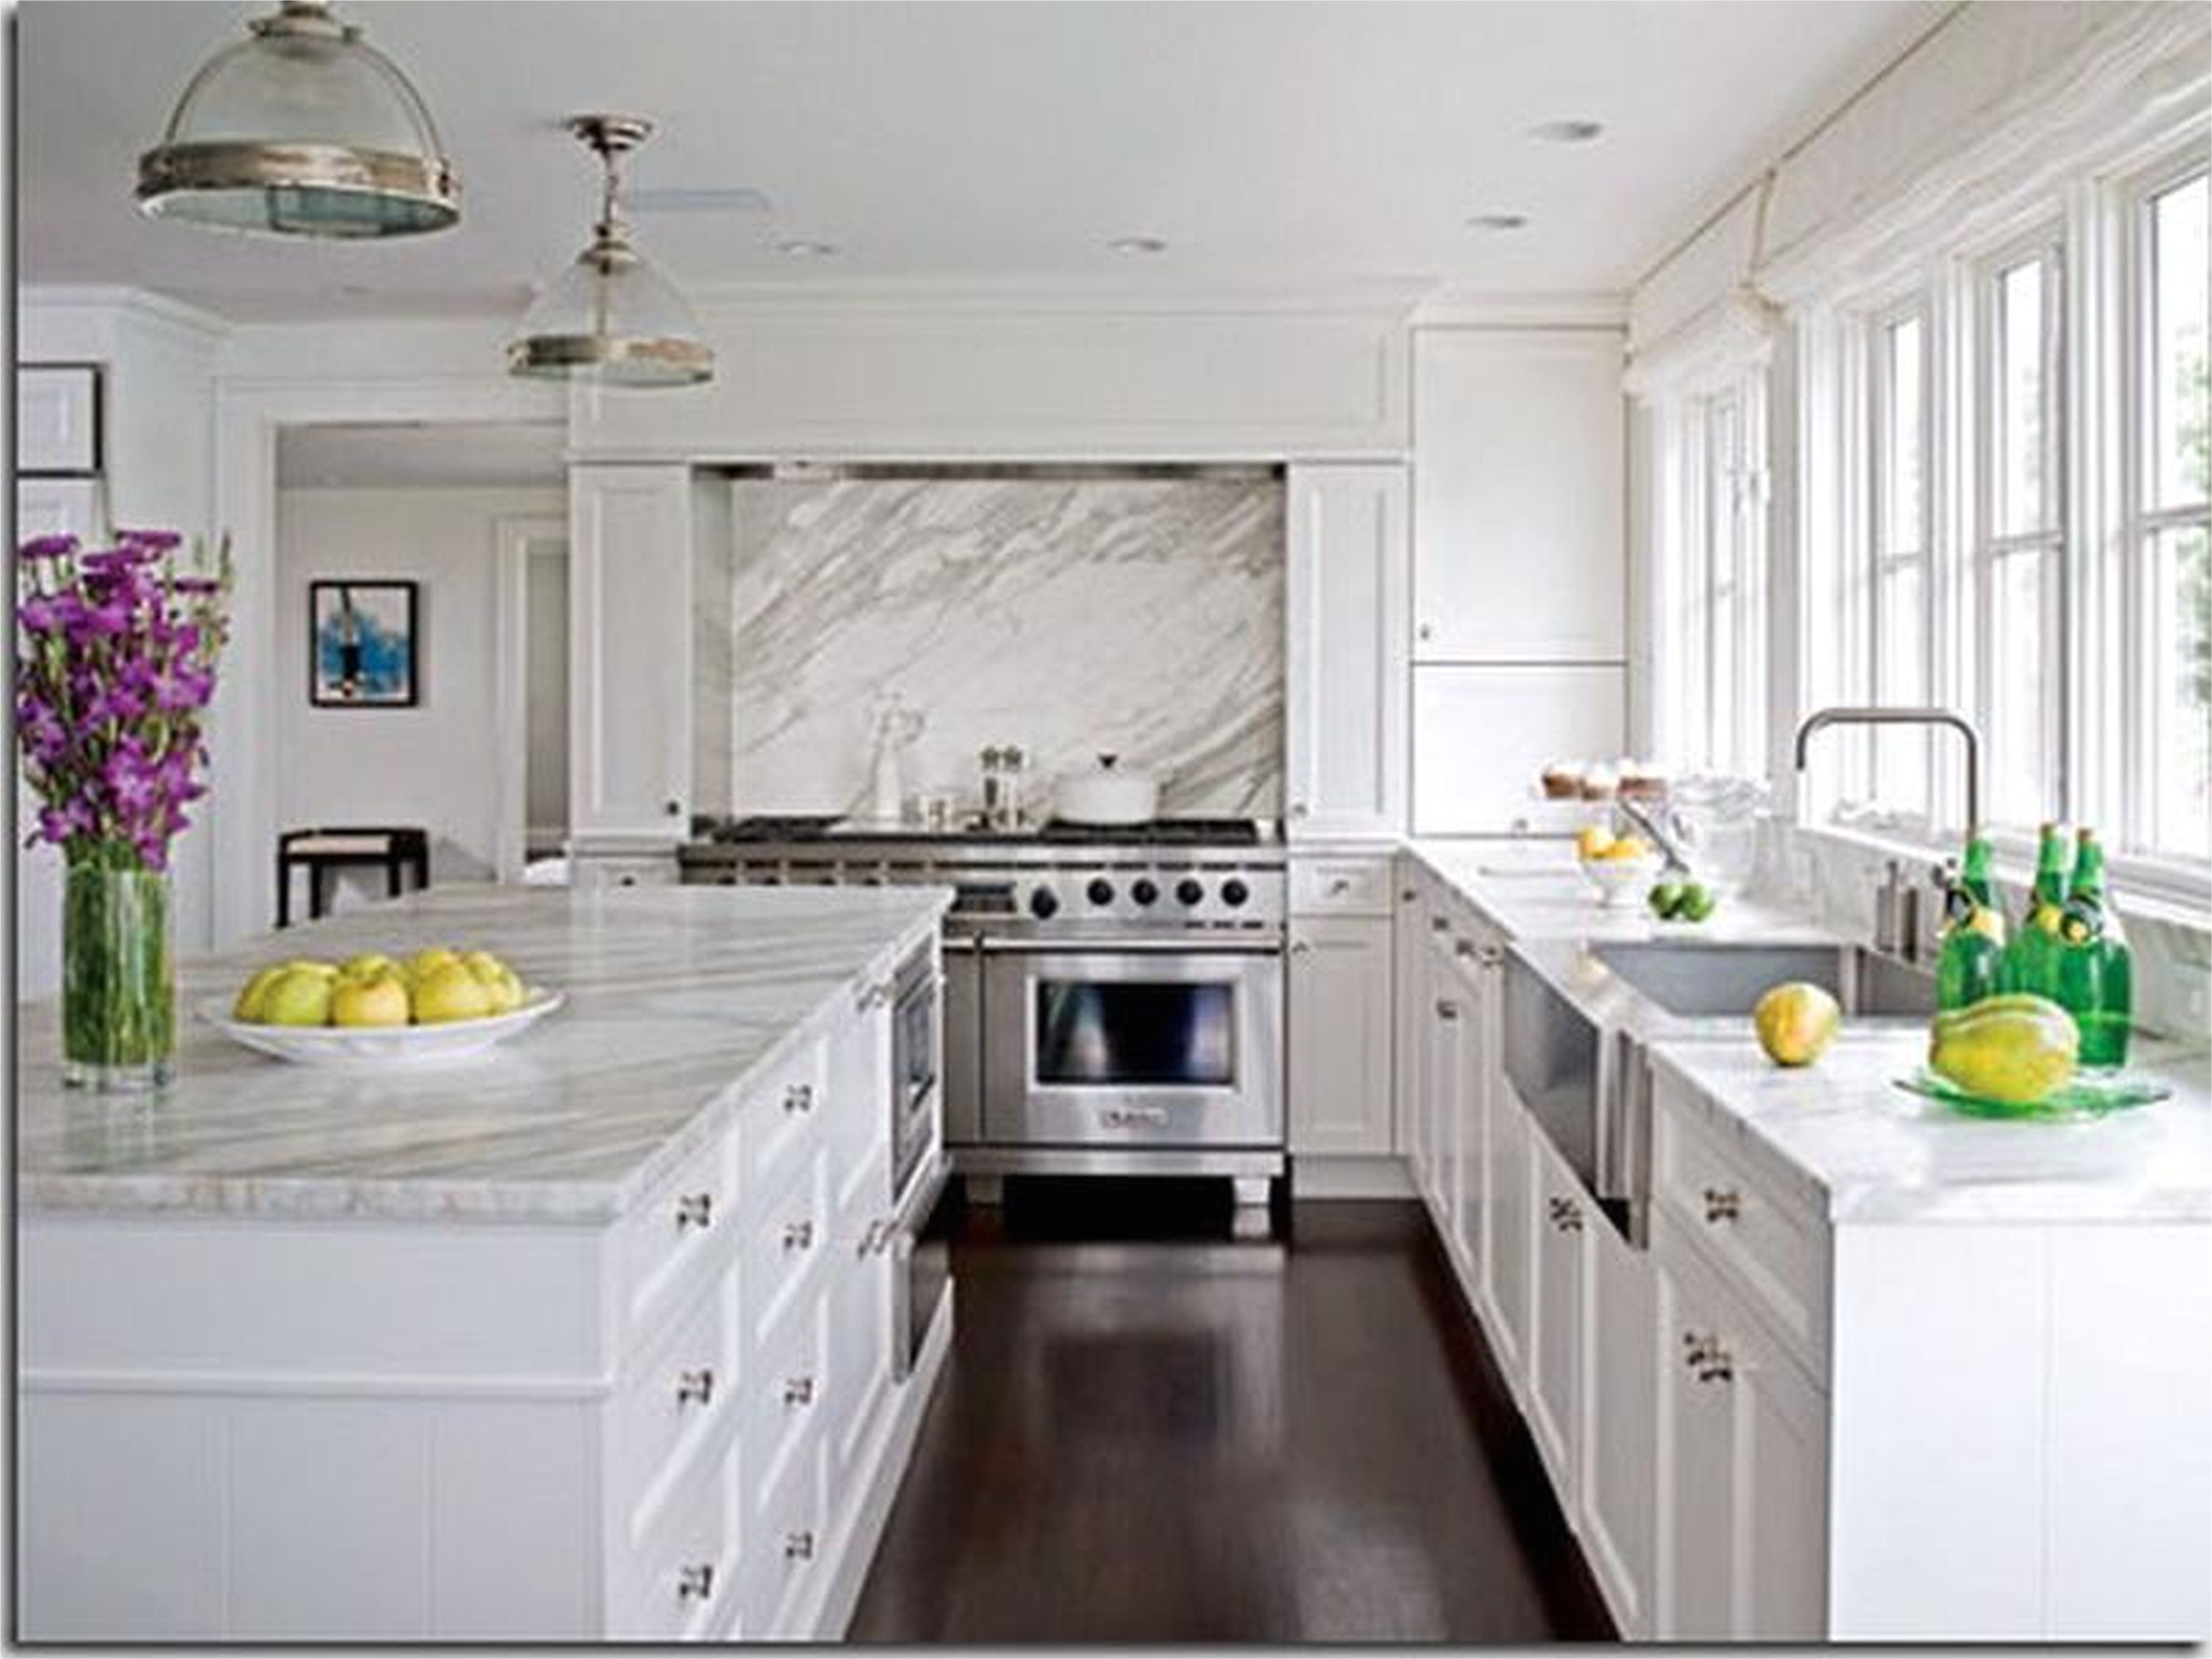 New White Kitchen Cabinets With Light Countertops for Small Space